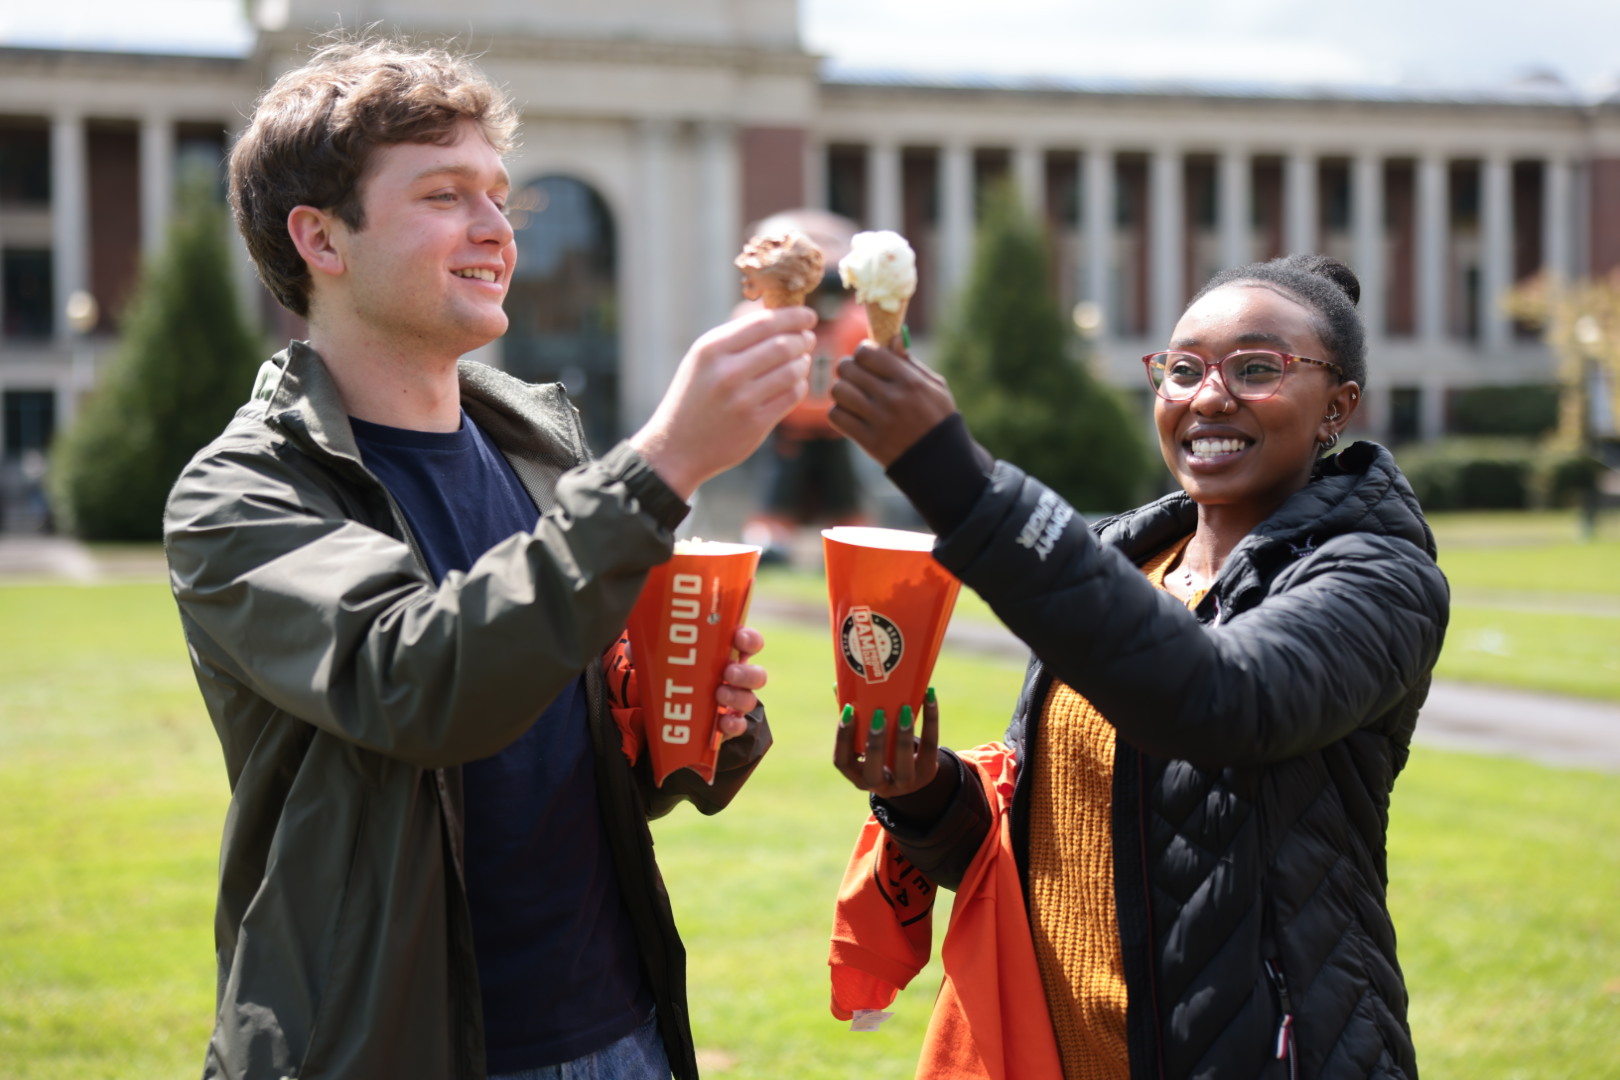 two students cheering eachother with ice cream cones while holding their new OSU swag from Dam Proud Day